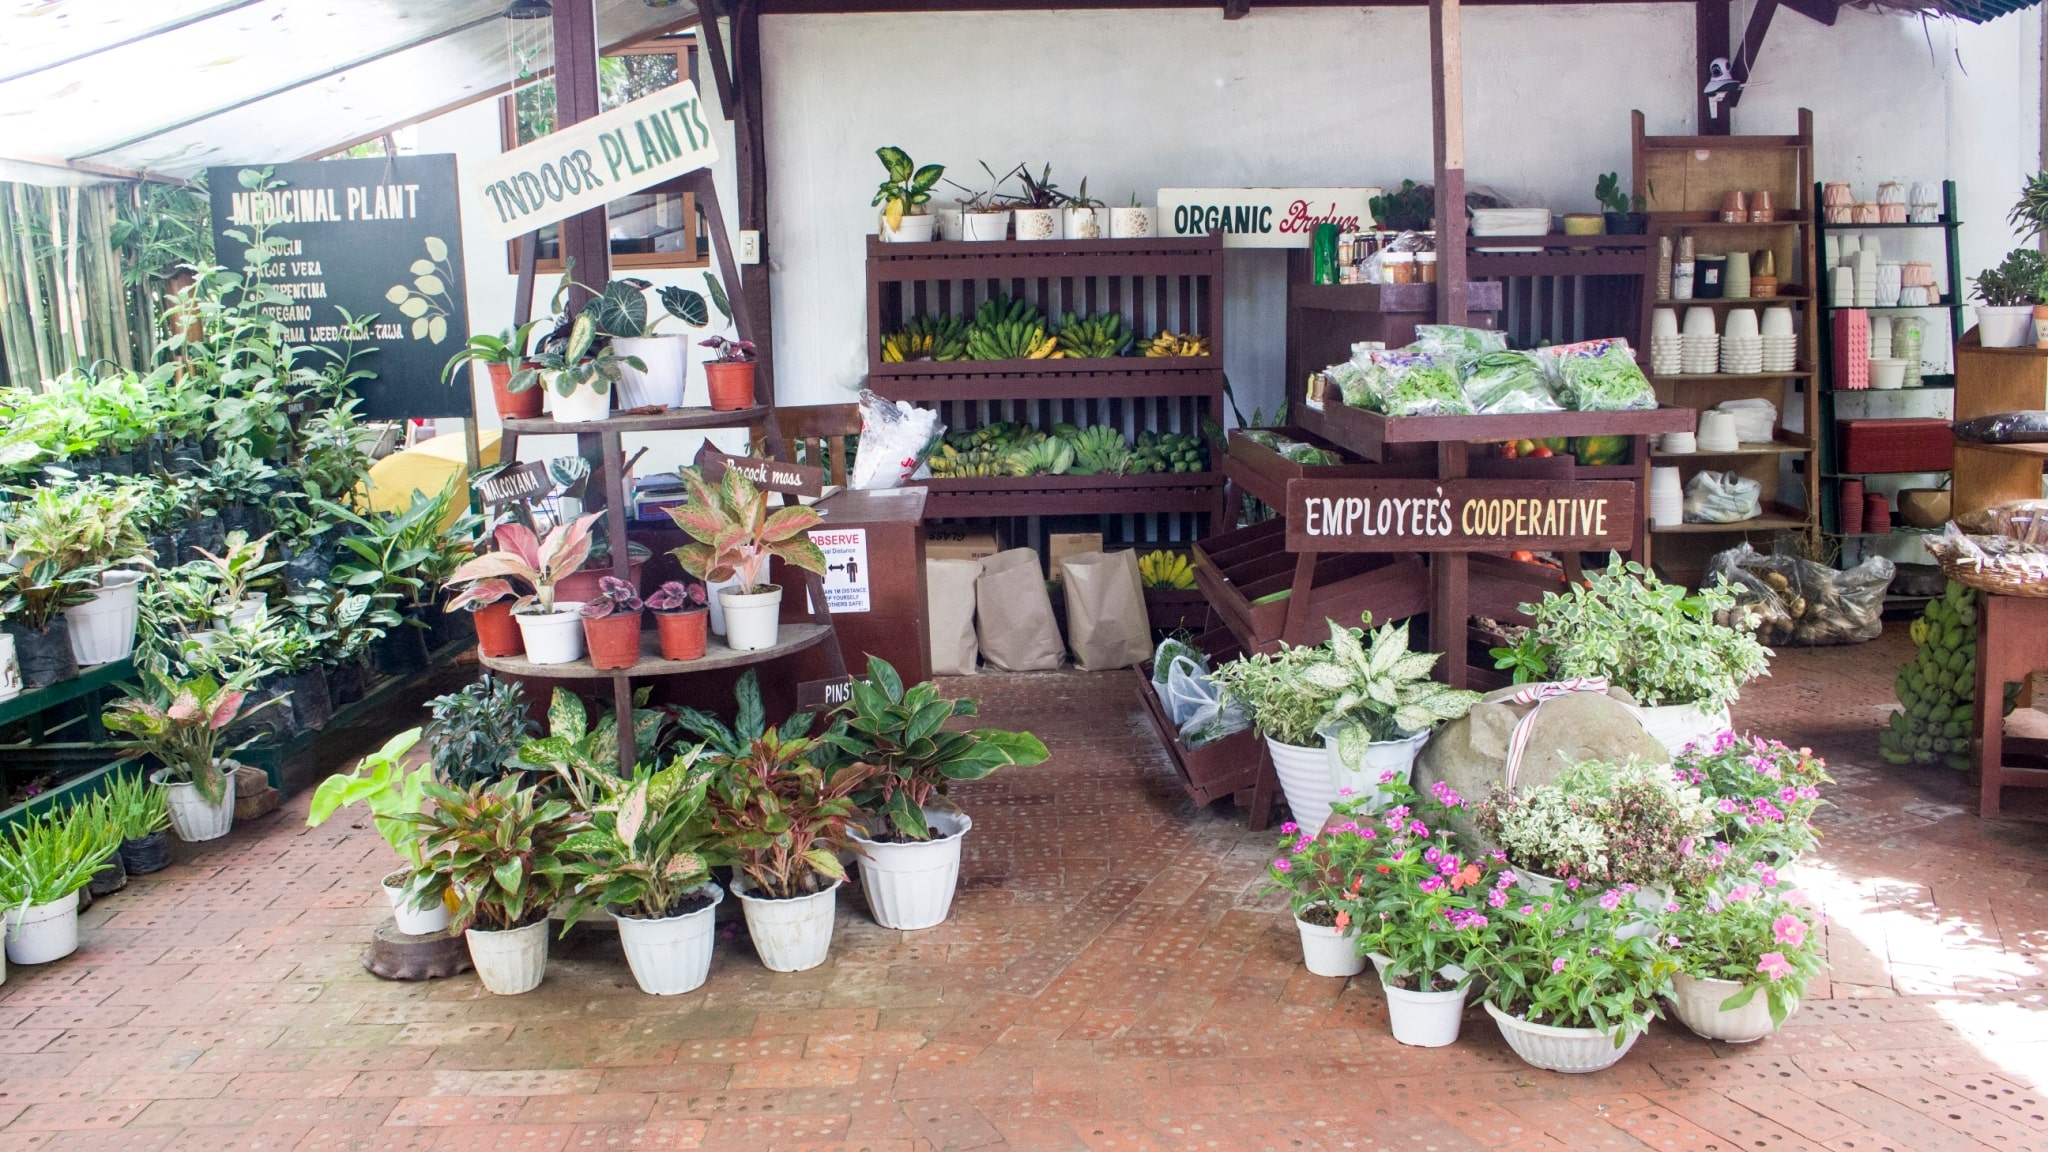 Before going home, guests can purchase plants and veggies at the Employee’s Cooperative.【Photo by Matt Serrano】